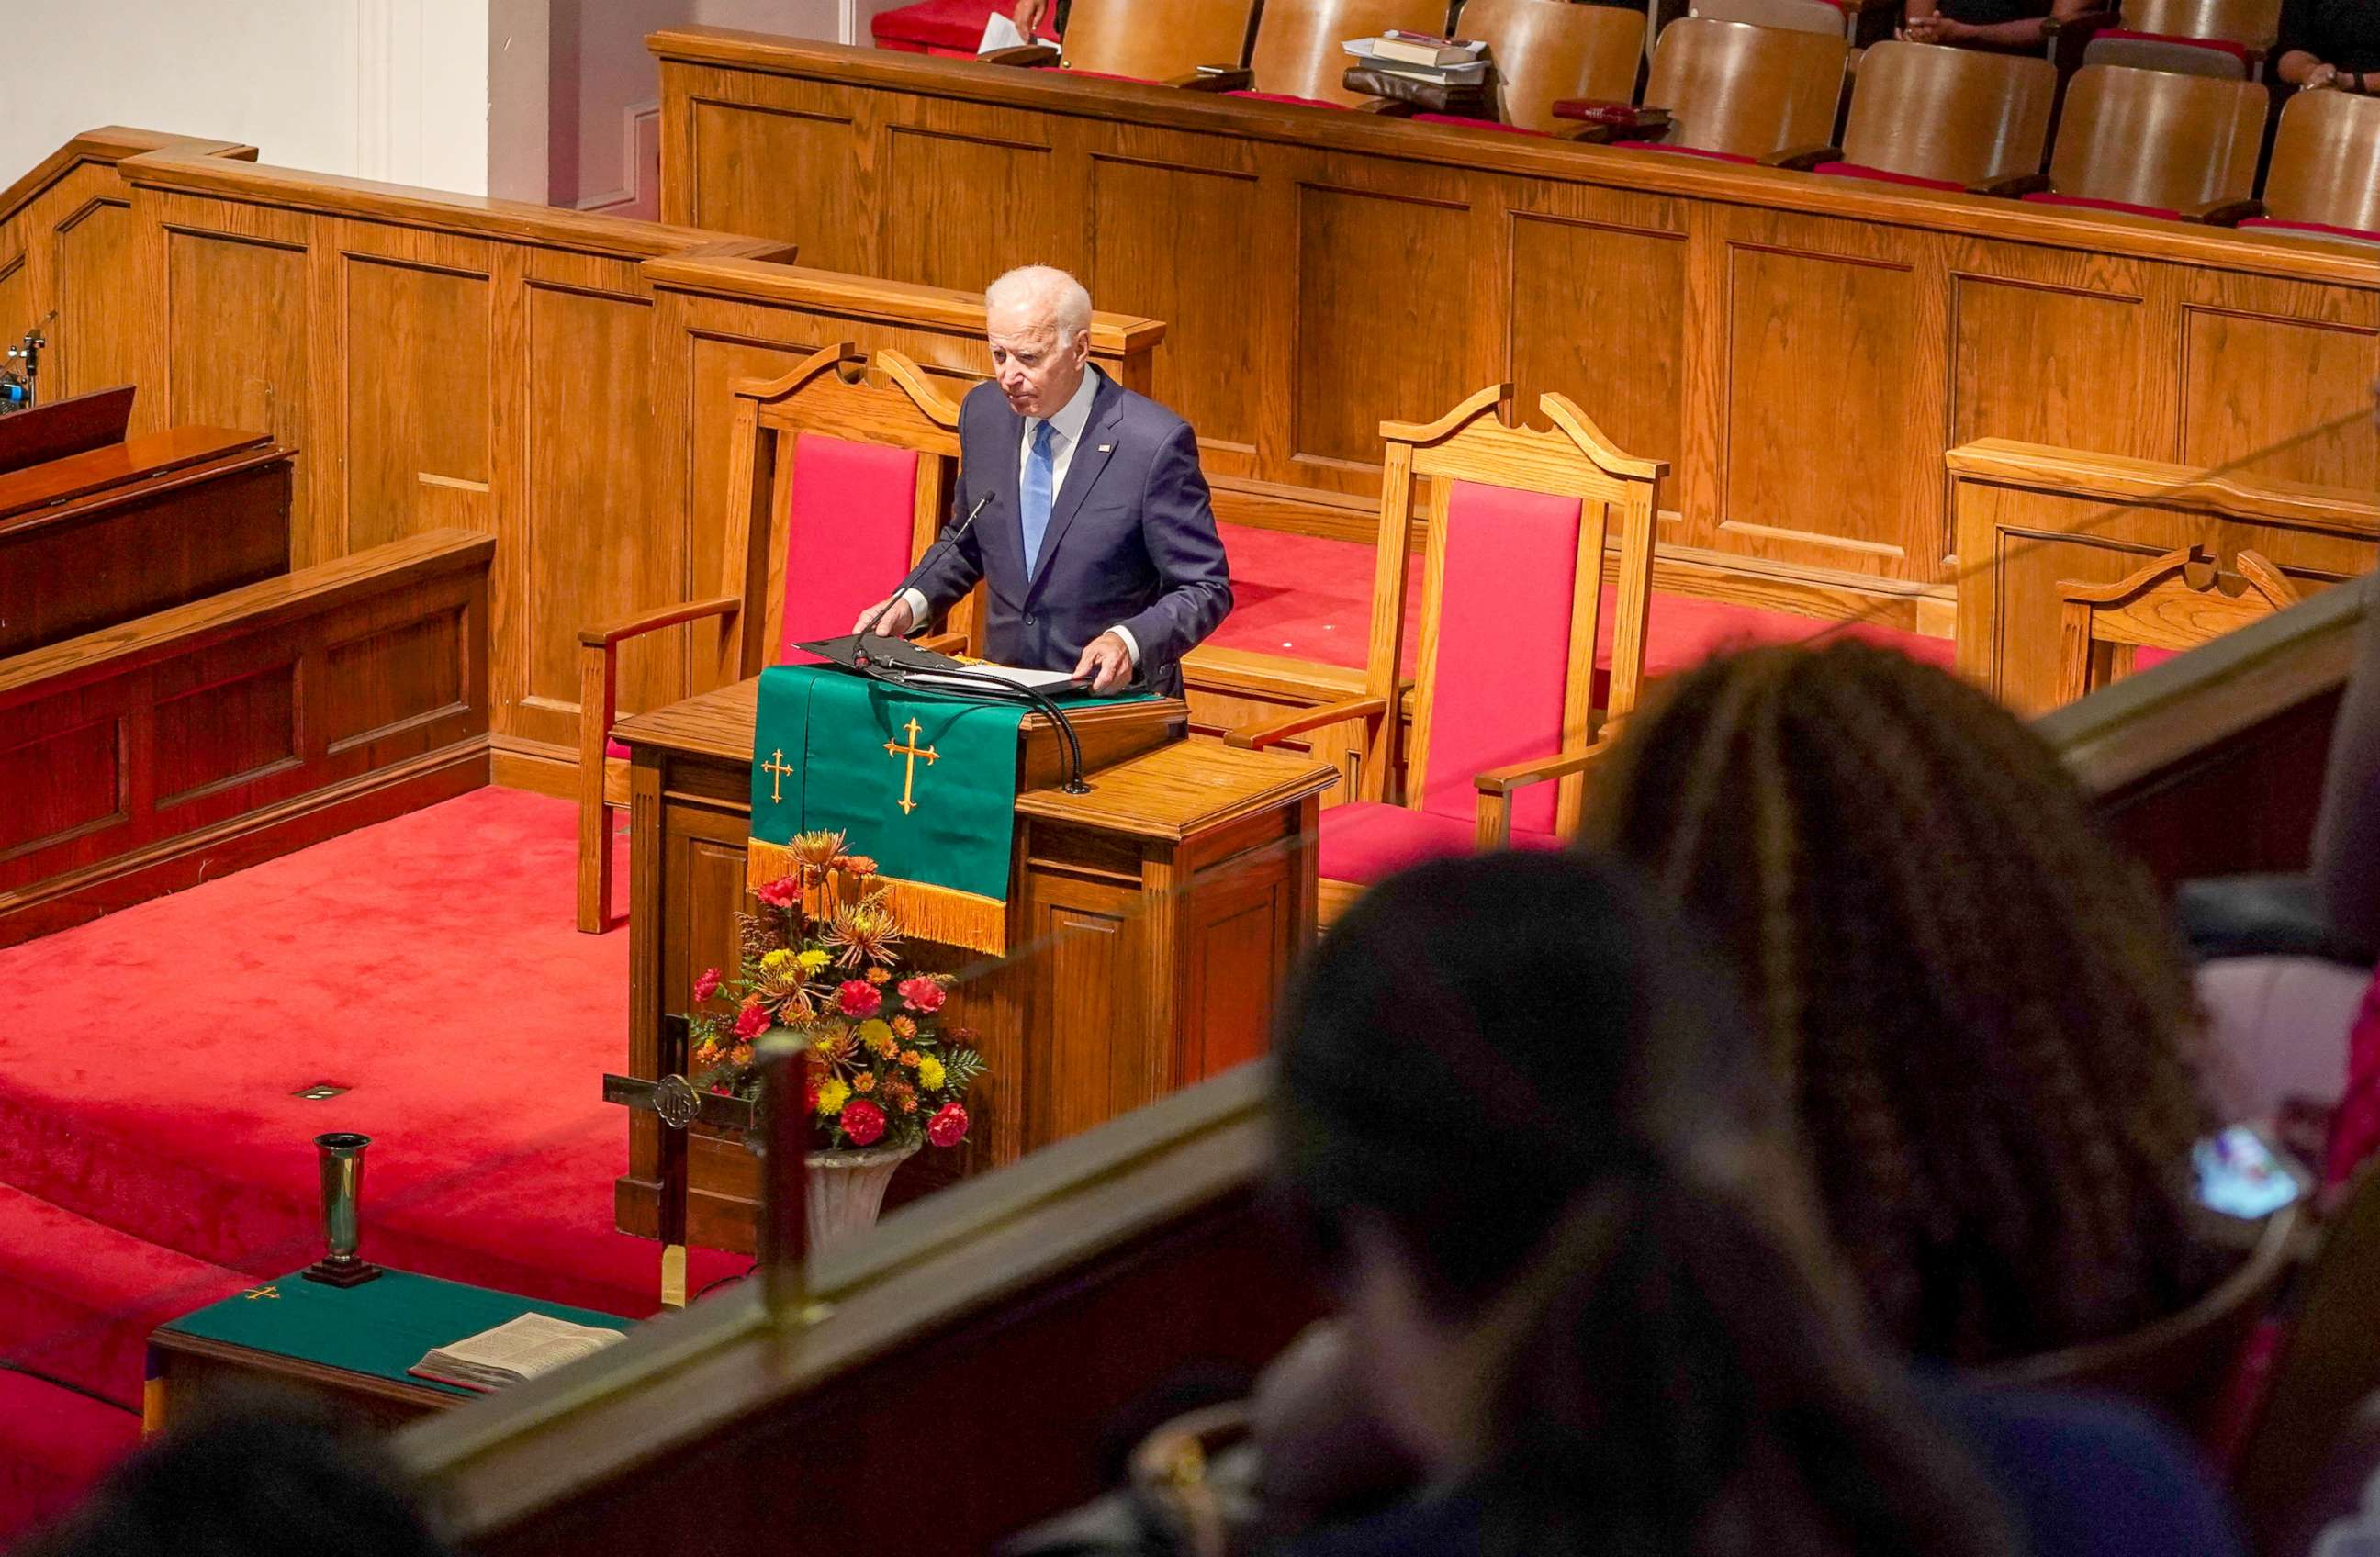 PHOTO: Democratic presidential candidate and former Vice President Joe Biden speaks at the "56th Memorial Observance of the Birmingham Church Bombing" at the 16th St Baptist Church in Birmingham, Alabama, Sept. 15, 2019.  